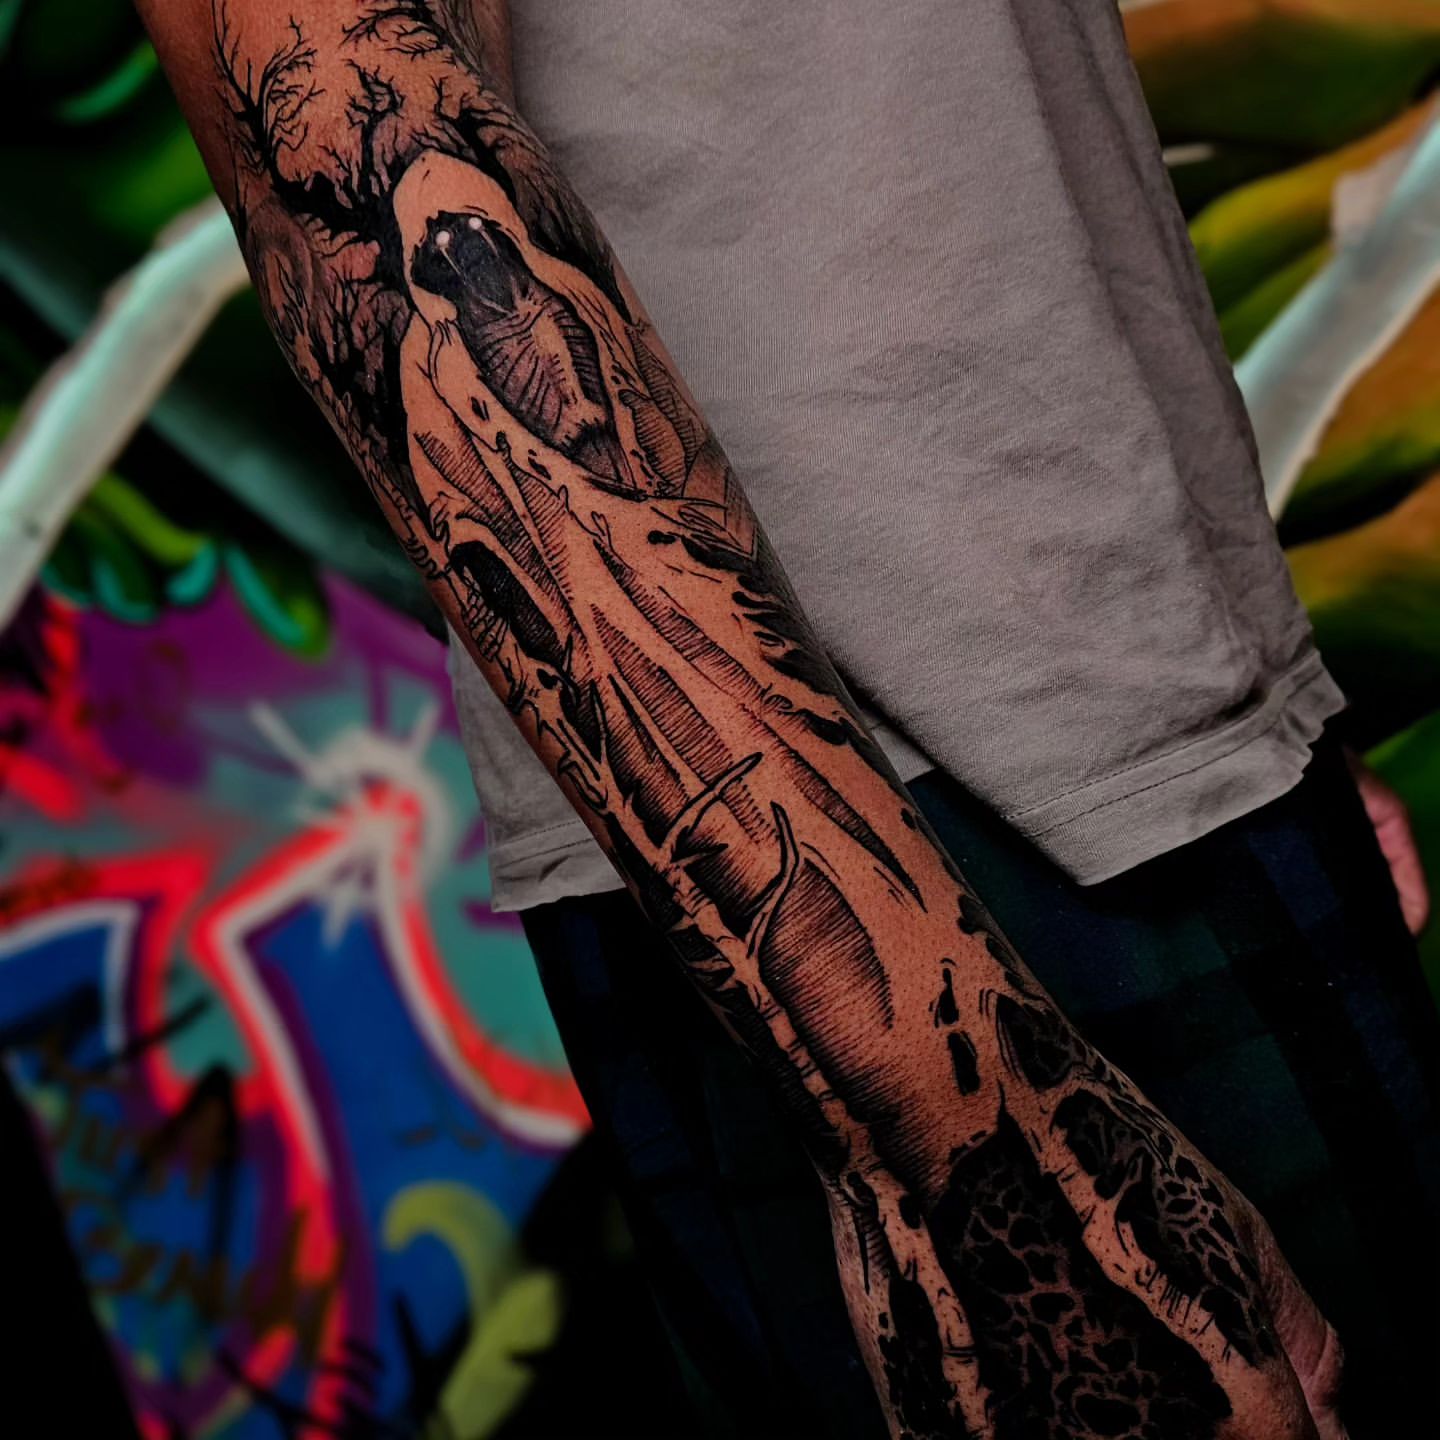 Looking for local tattoo artist for patchwork sleeve! : r/kansascity